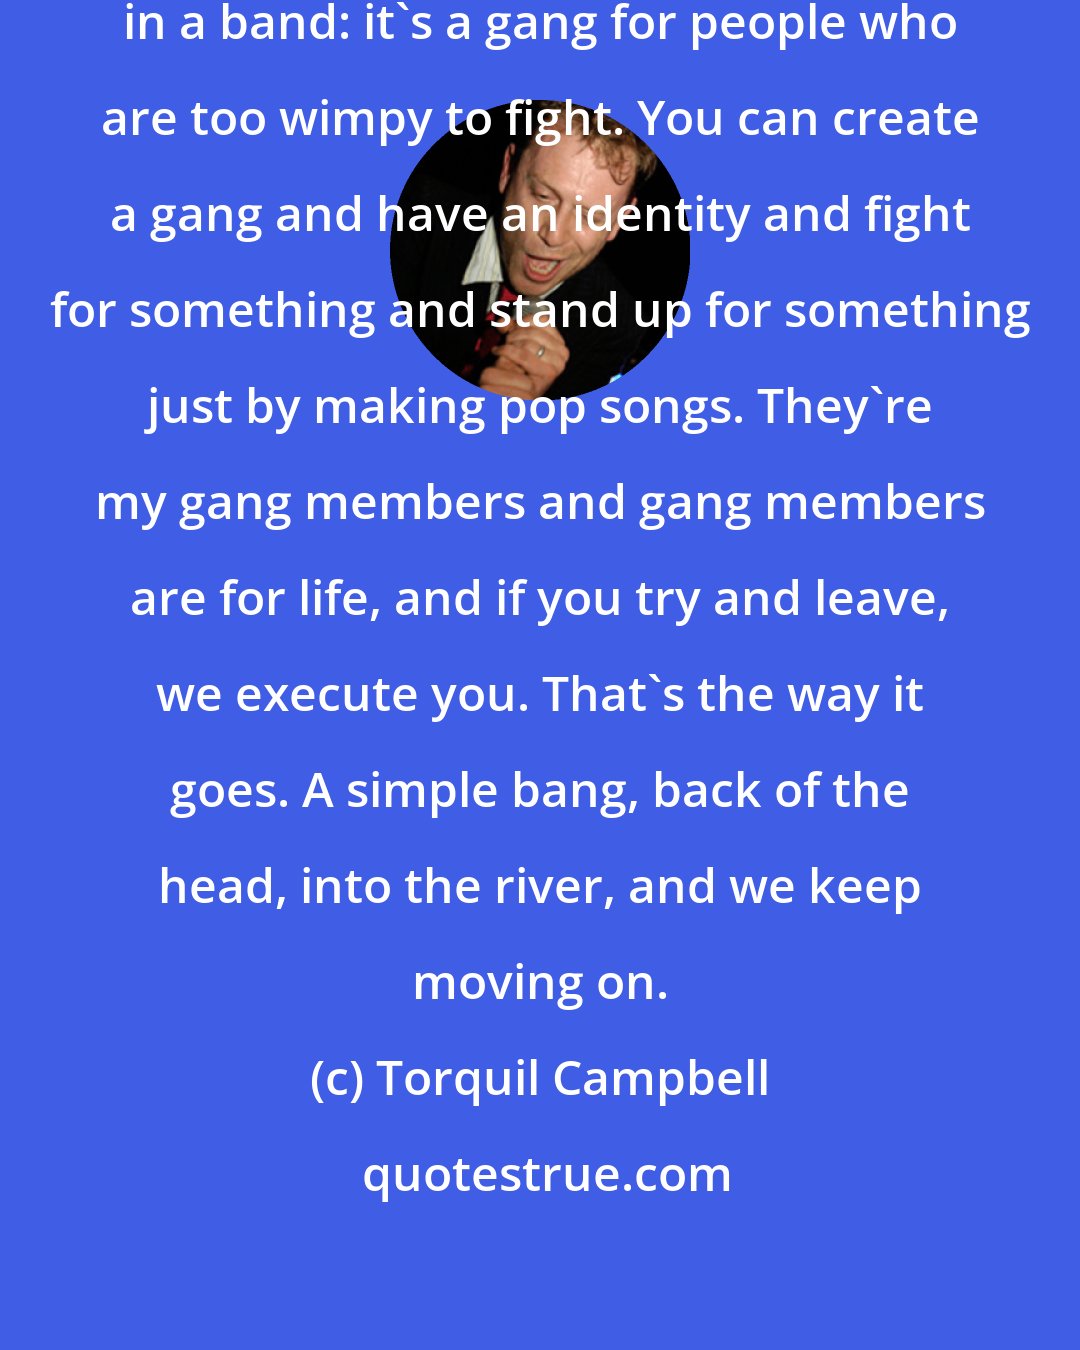 Torquil Campbell: That's the great thing about being in a band: it's a gang for people who are too wimpy to fight. You can create a gang and have an identity and fight for something and stand up for something just by making pop songs. They're my gang members and gang members are for life, and if you try and leave, we execute you. That's the way it goes. A simple bang, back of the head, into the river, and we keep moving on.